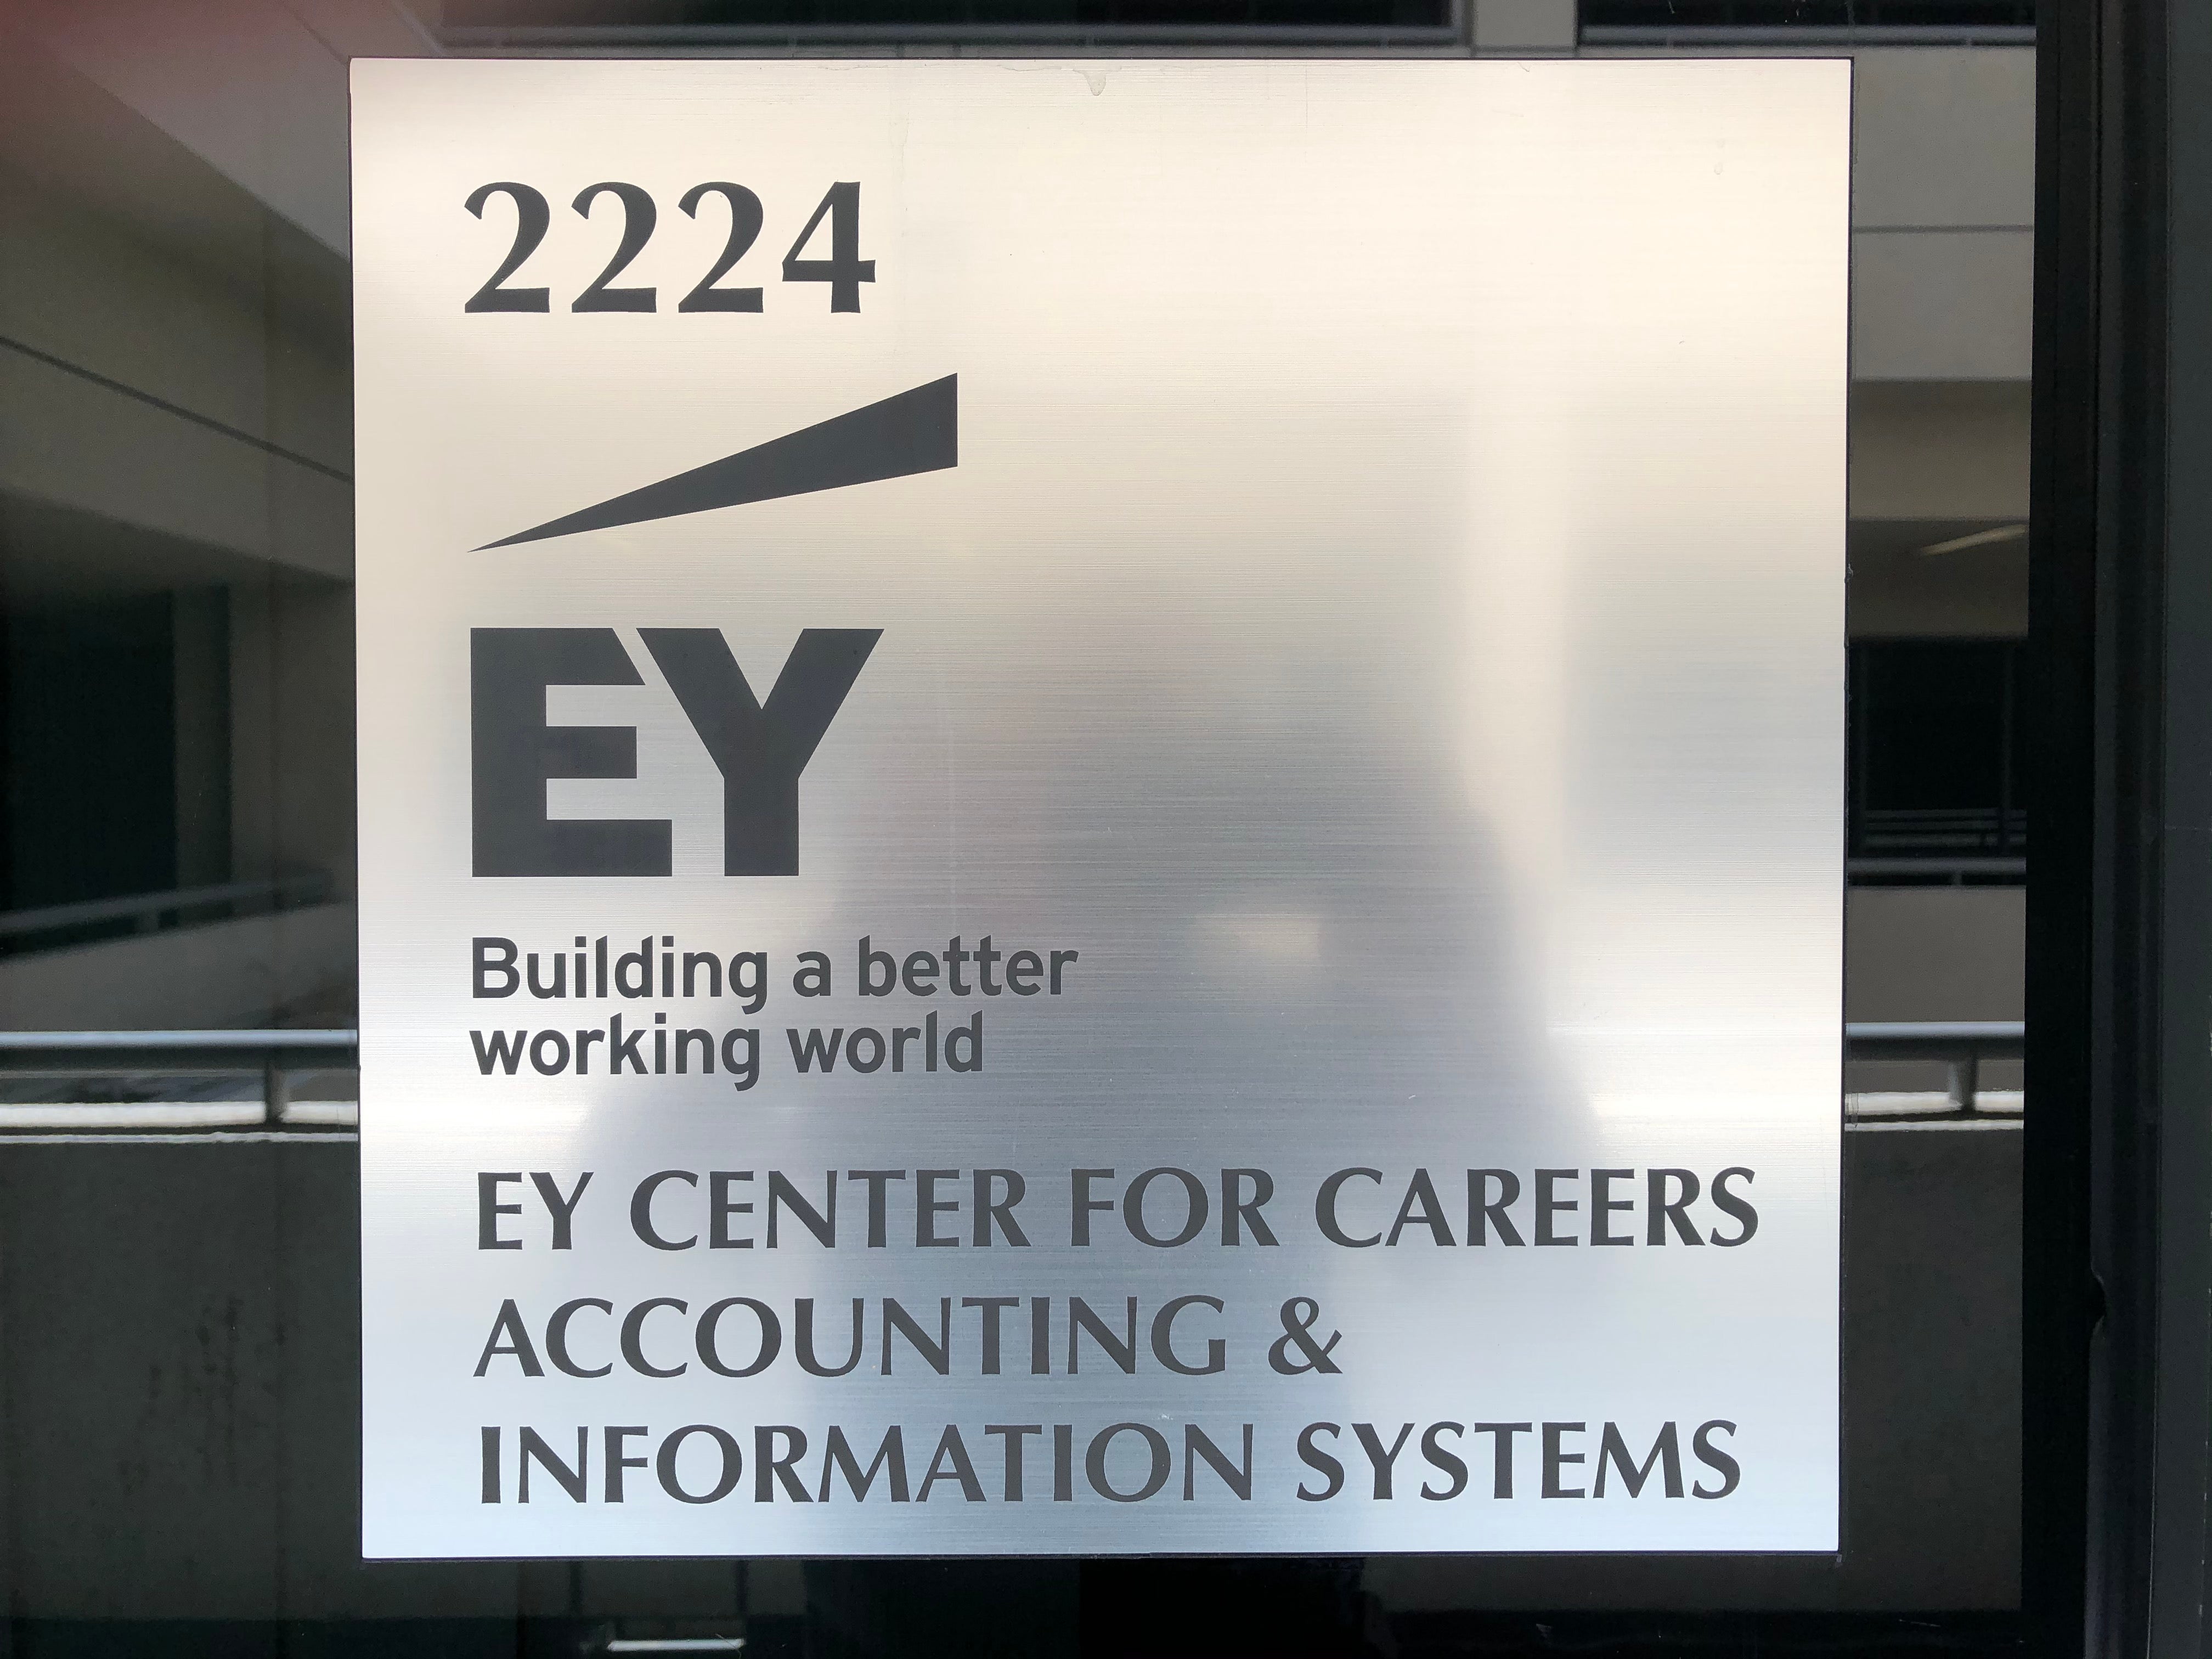 EY Center for Careers